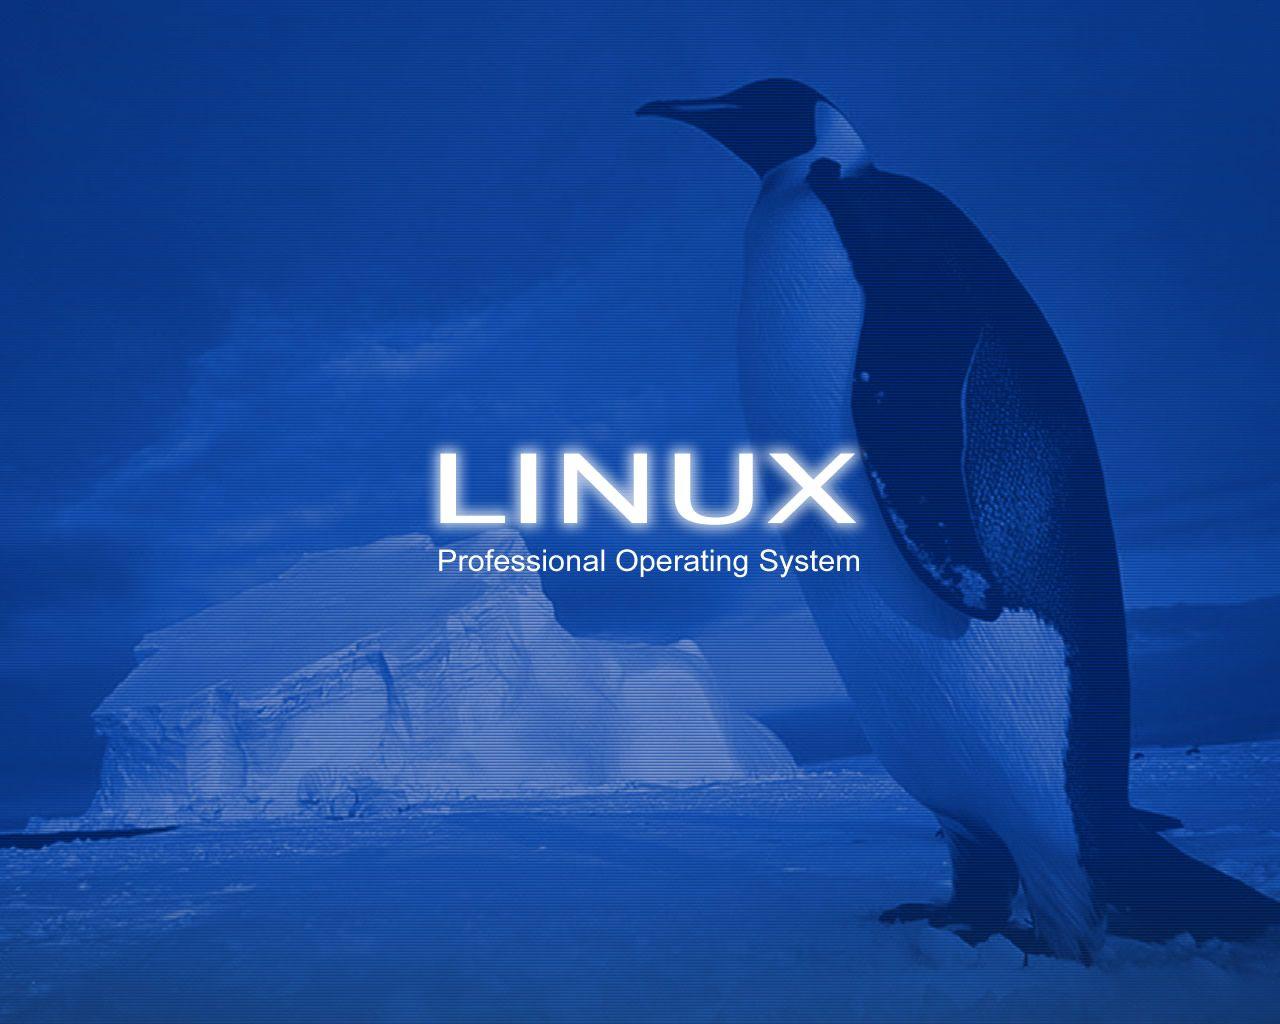 Free Download technology linux background 1280 x 1024 id 19523